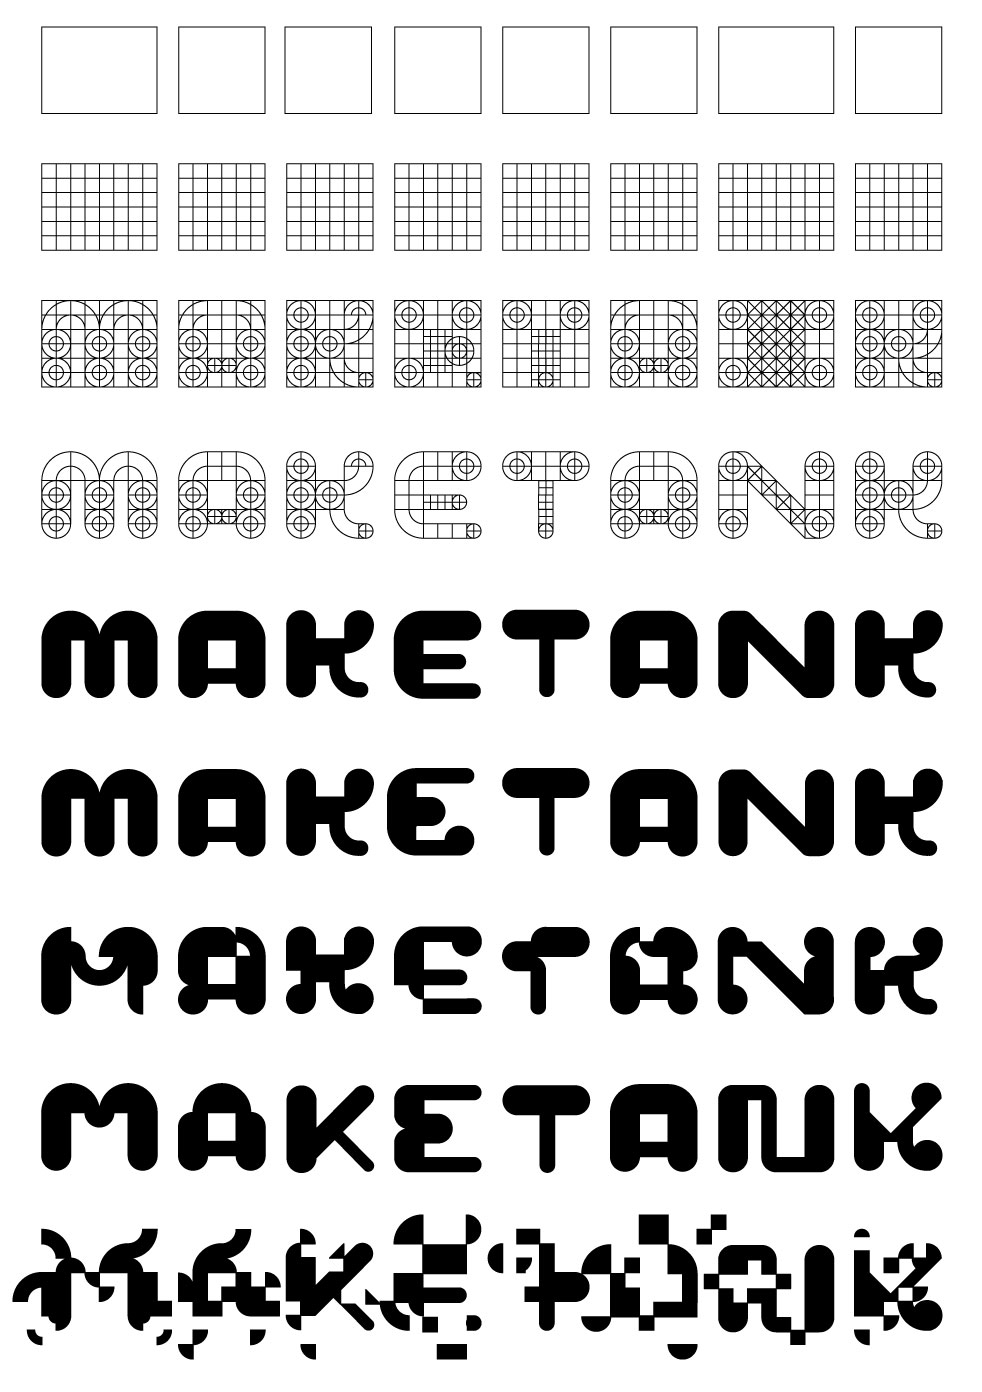 Many development versions of the Make Tank logo mark from wireframe to completed version and then distorted.